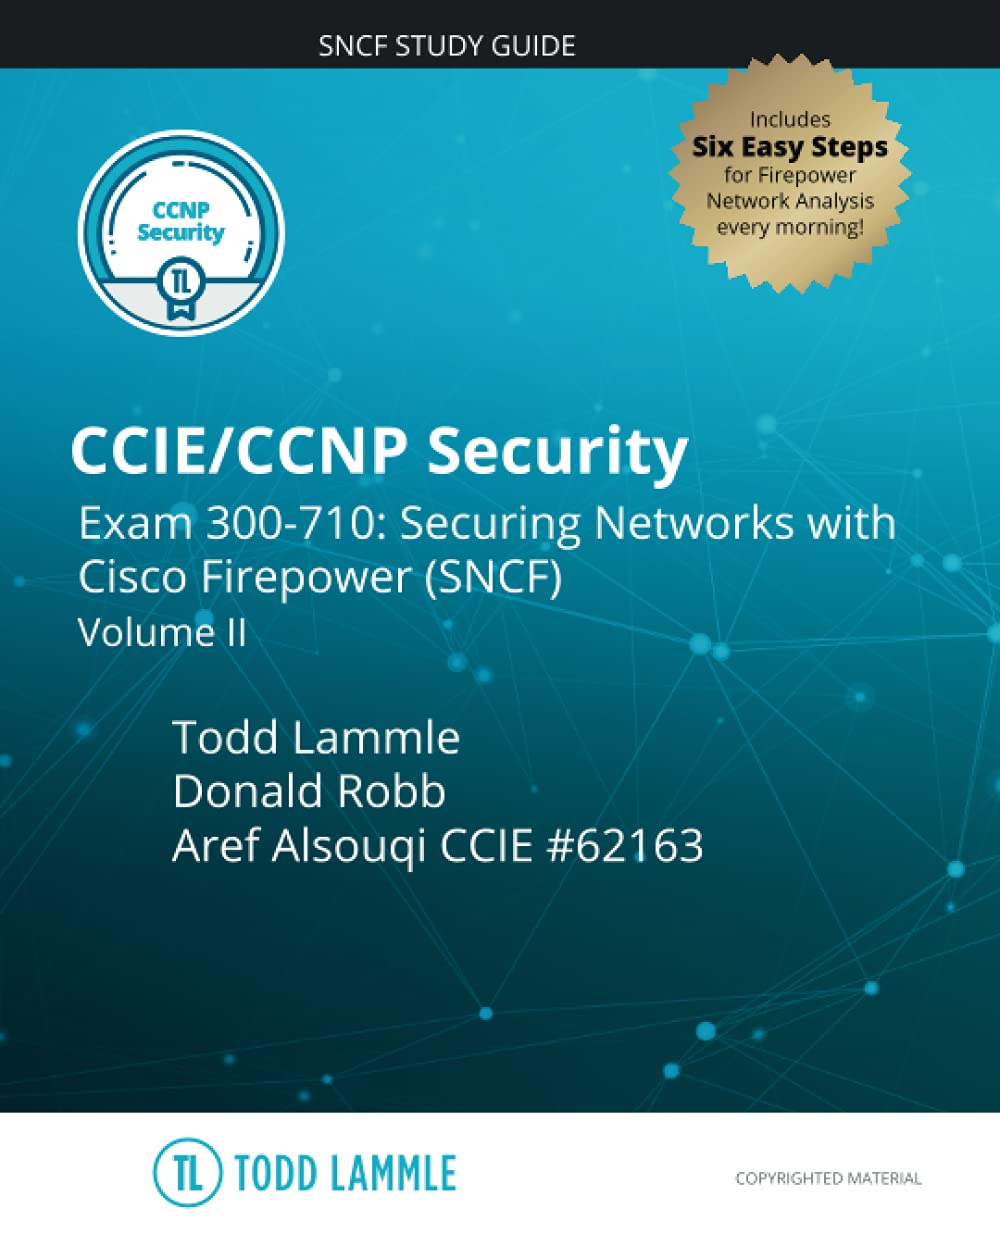 CCIE/CCNP Security Exam 300-710: Securing Networks with Cisco Firepower (SNCF): Volume II (Todd Lammle Authorized Study Guides)